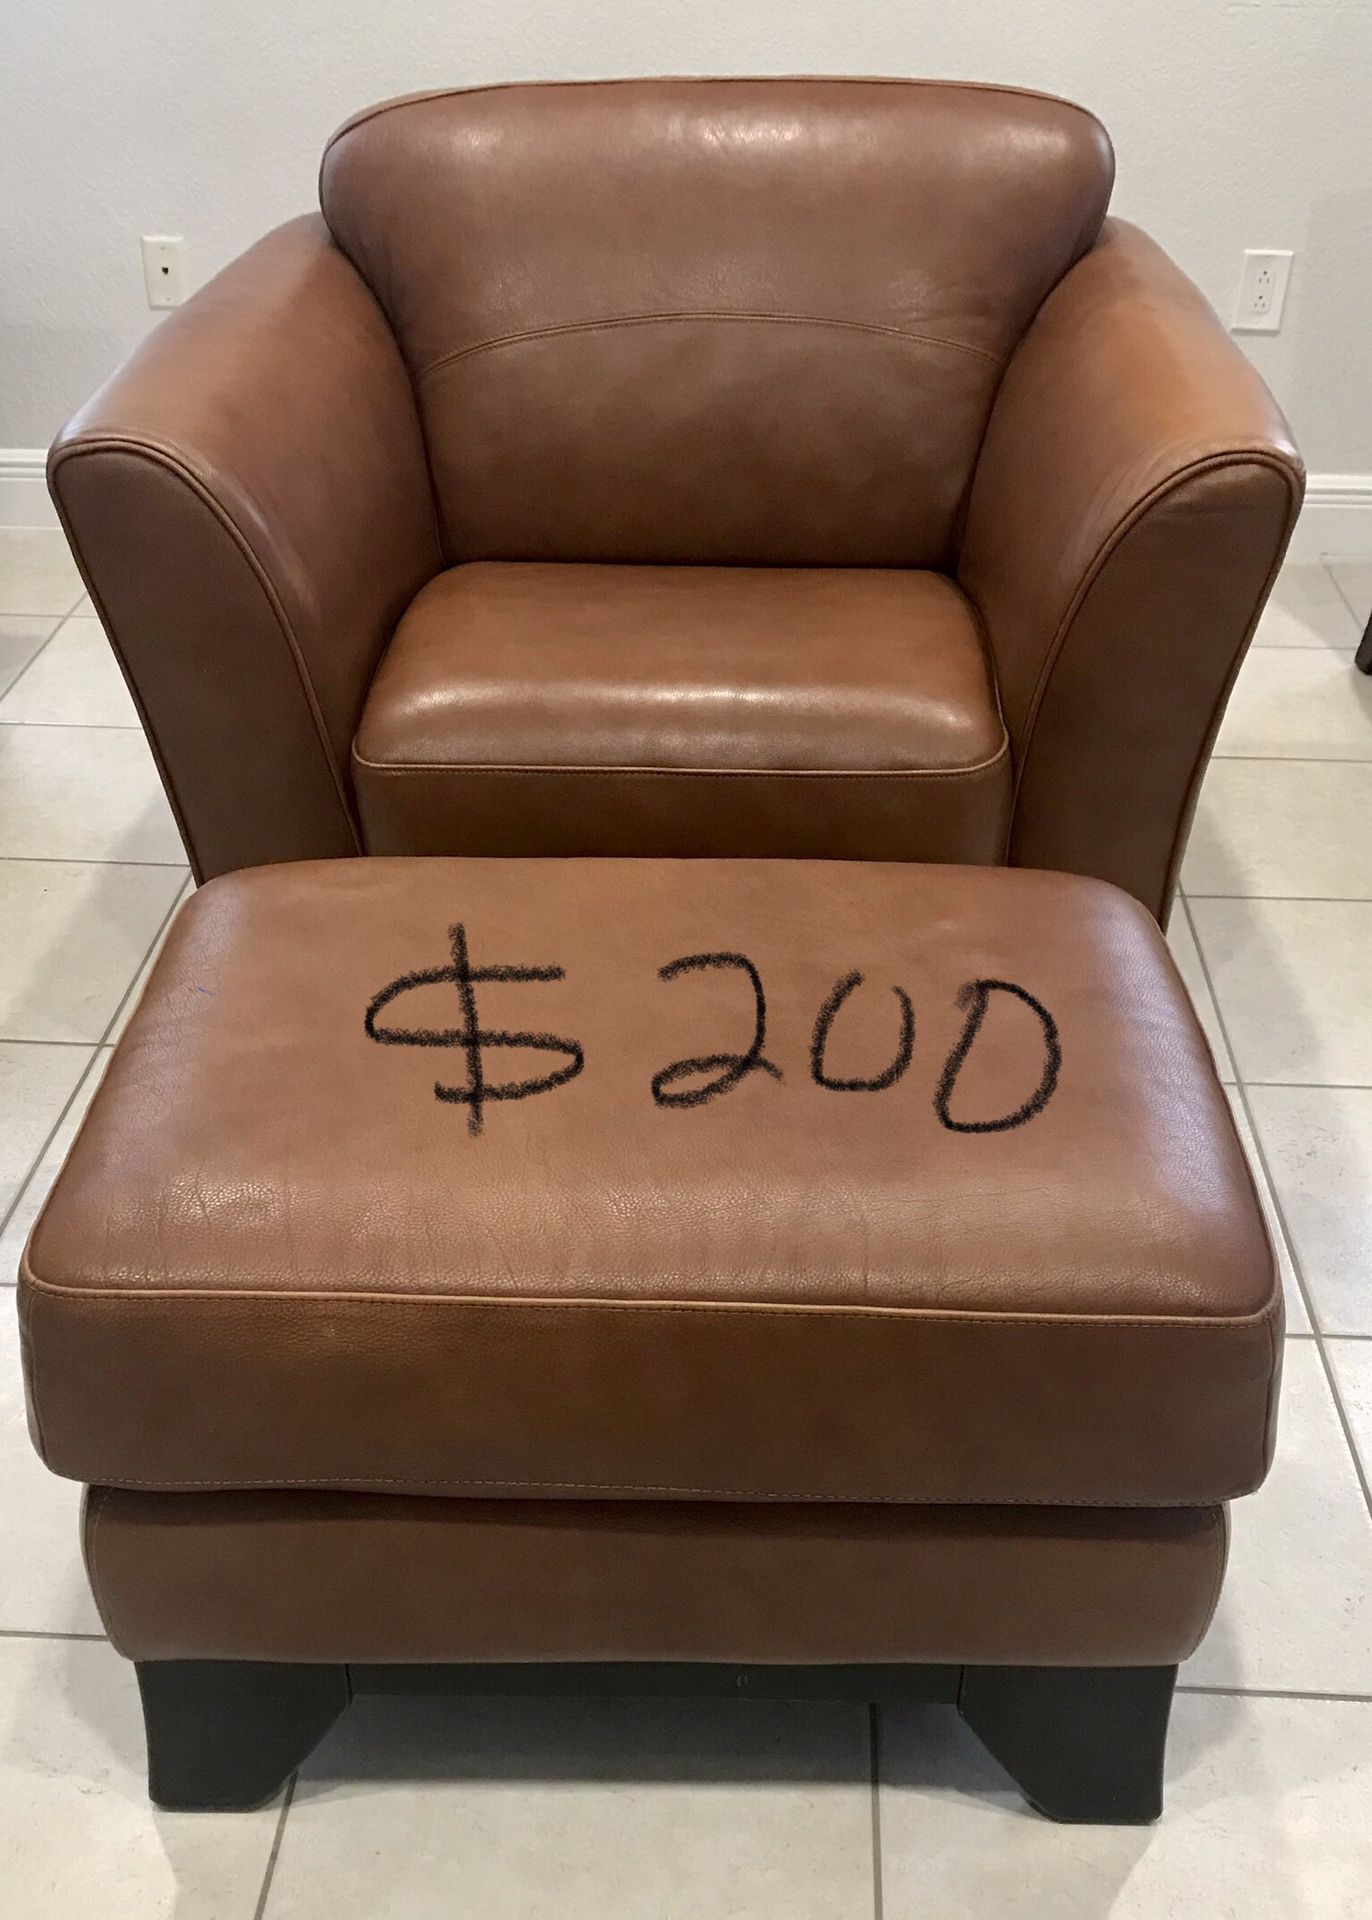 Furniture - everything in great condition